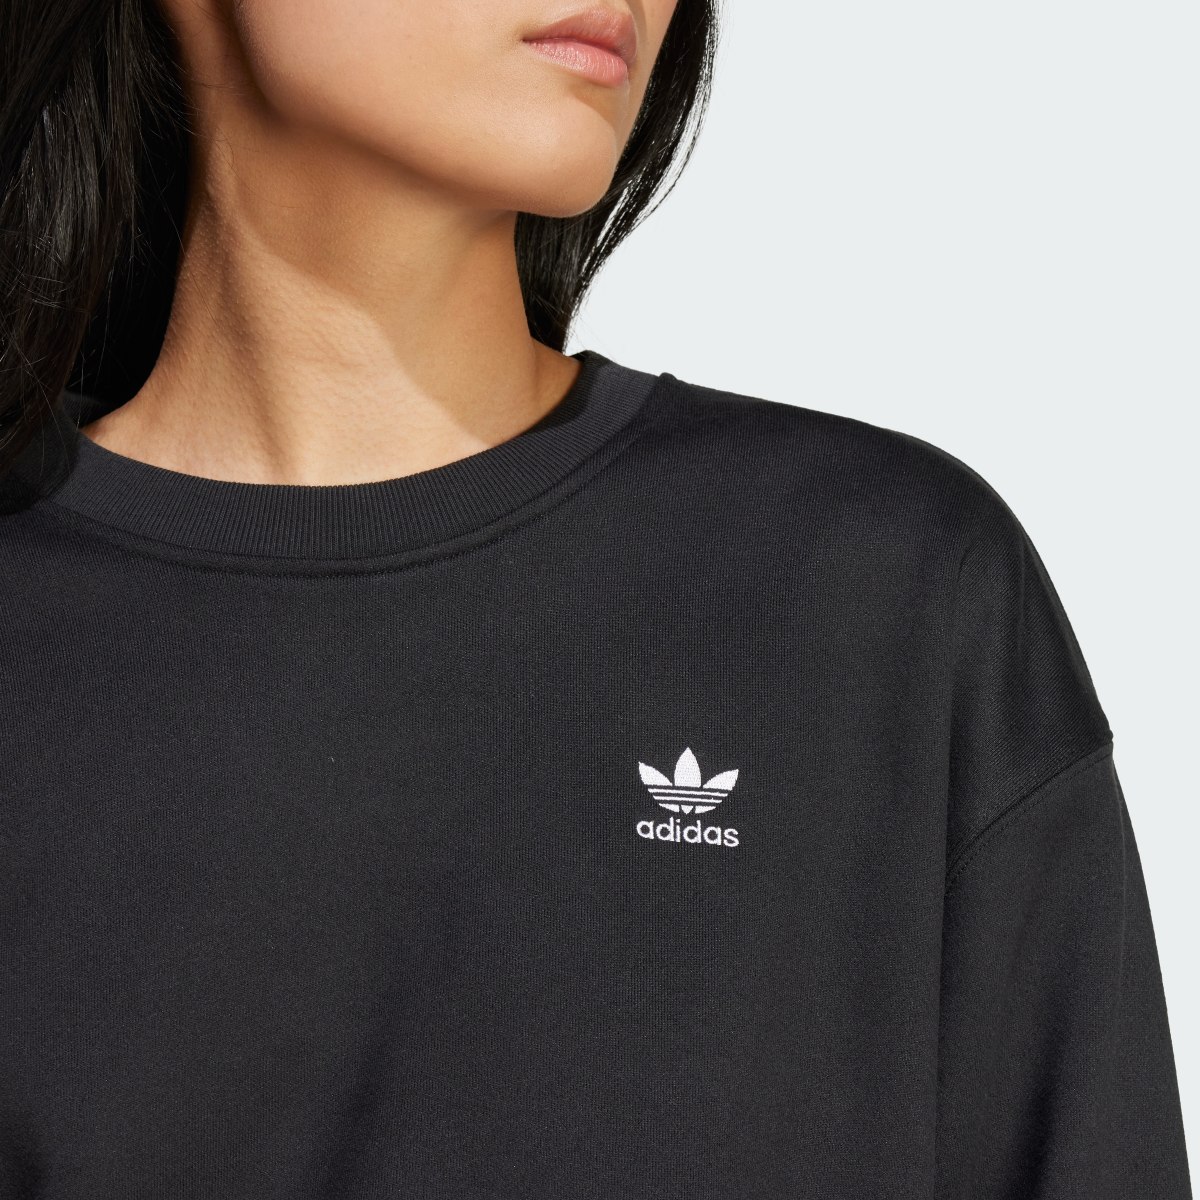 Adidas Trefoil Cropped Sweater. 6